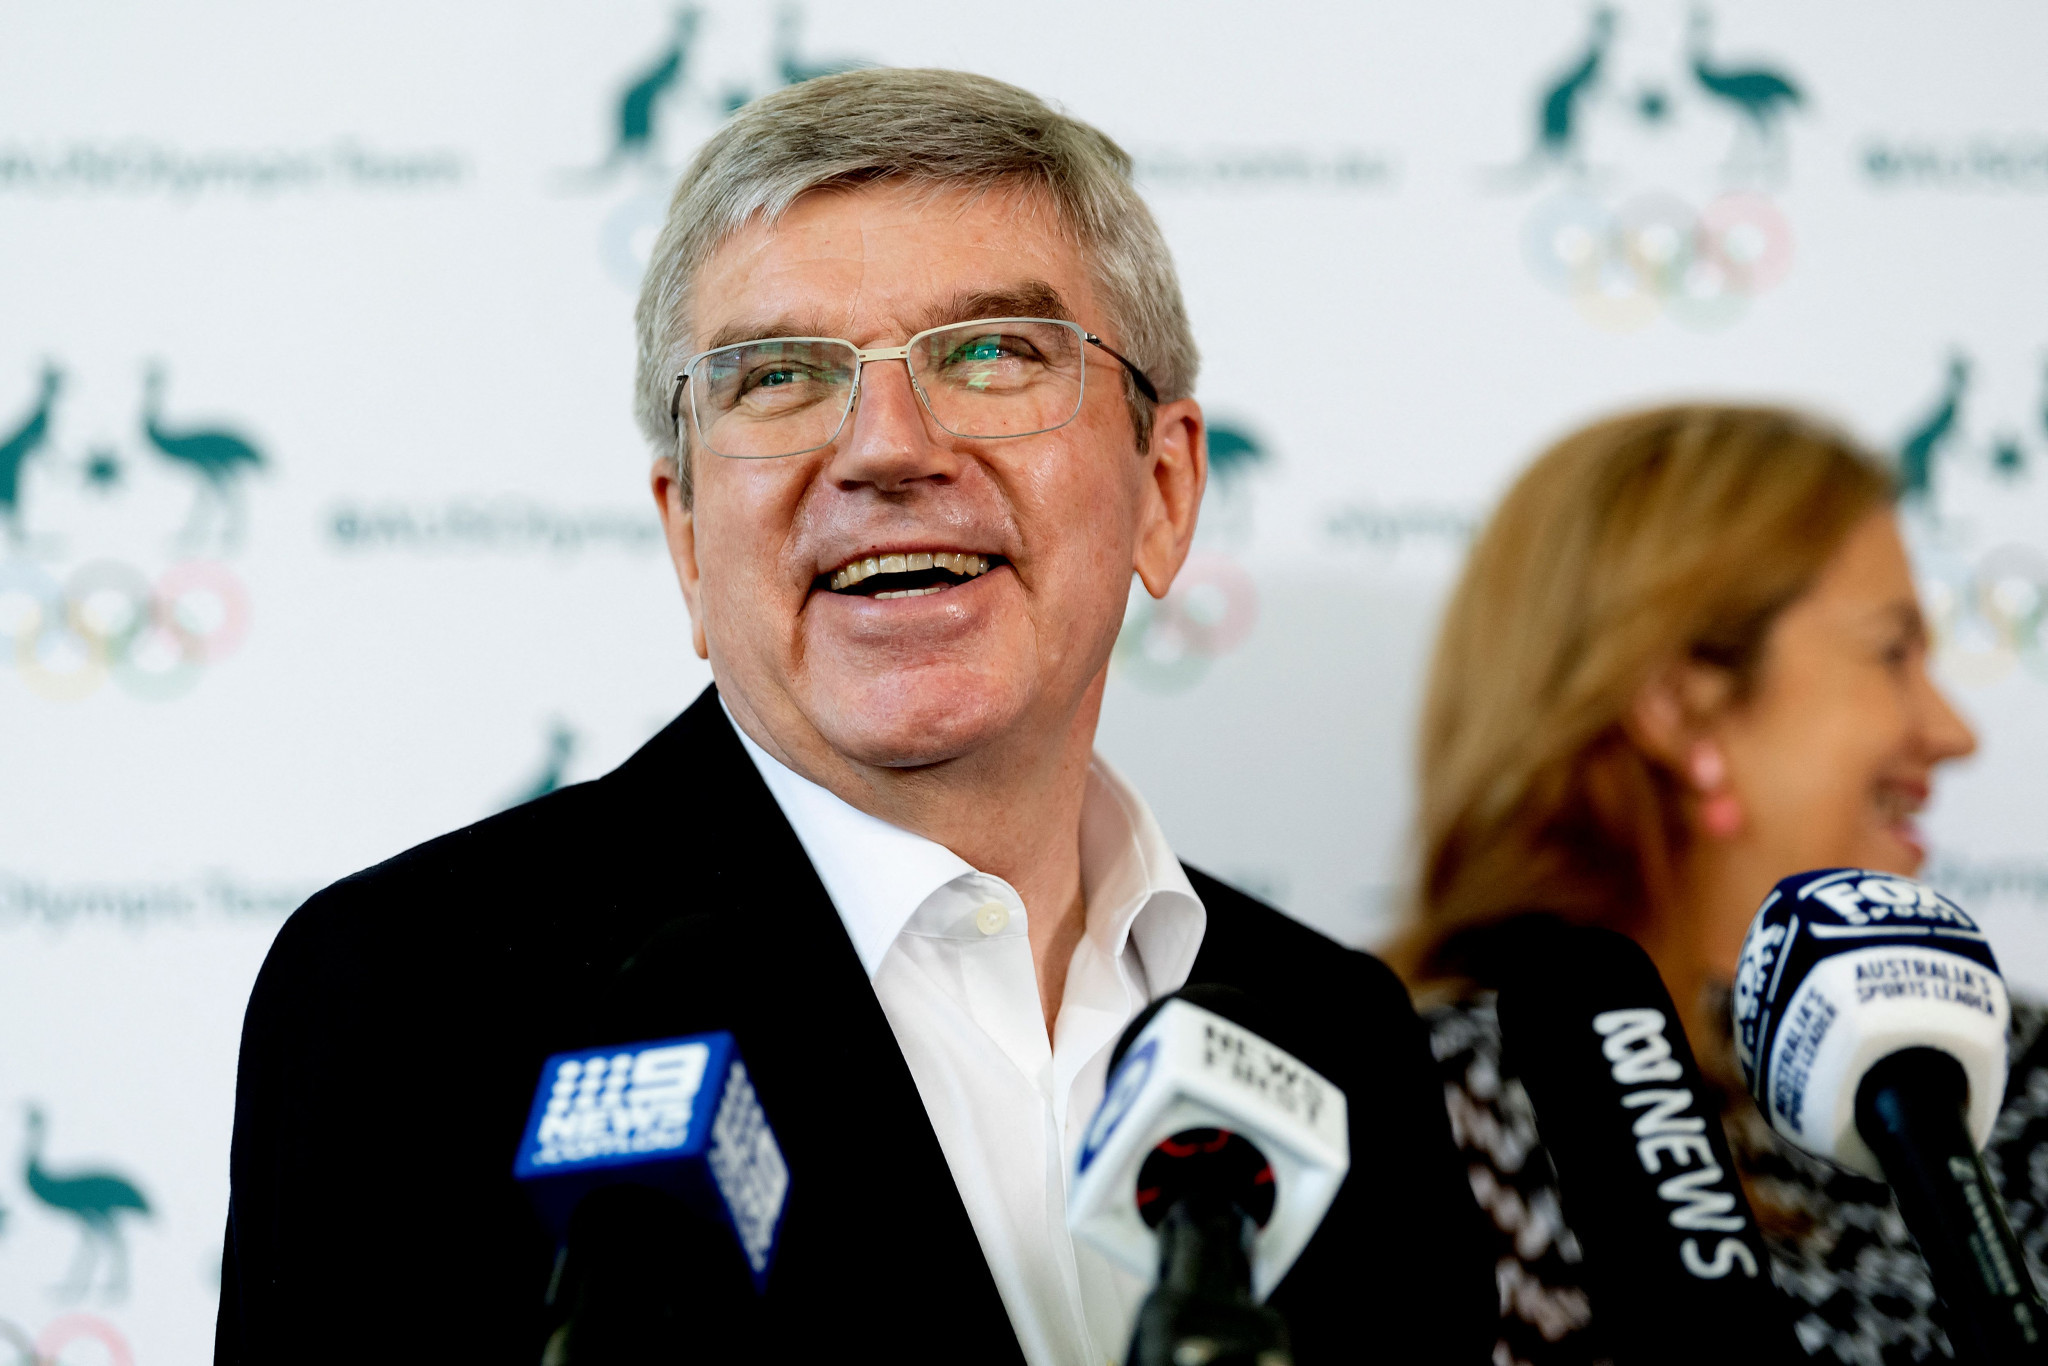 IOC President Thomas Bach's annual indemnity rose by €50,000 in 2021 ©Getty Images